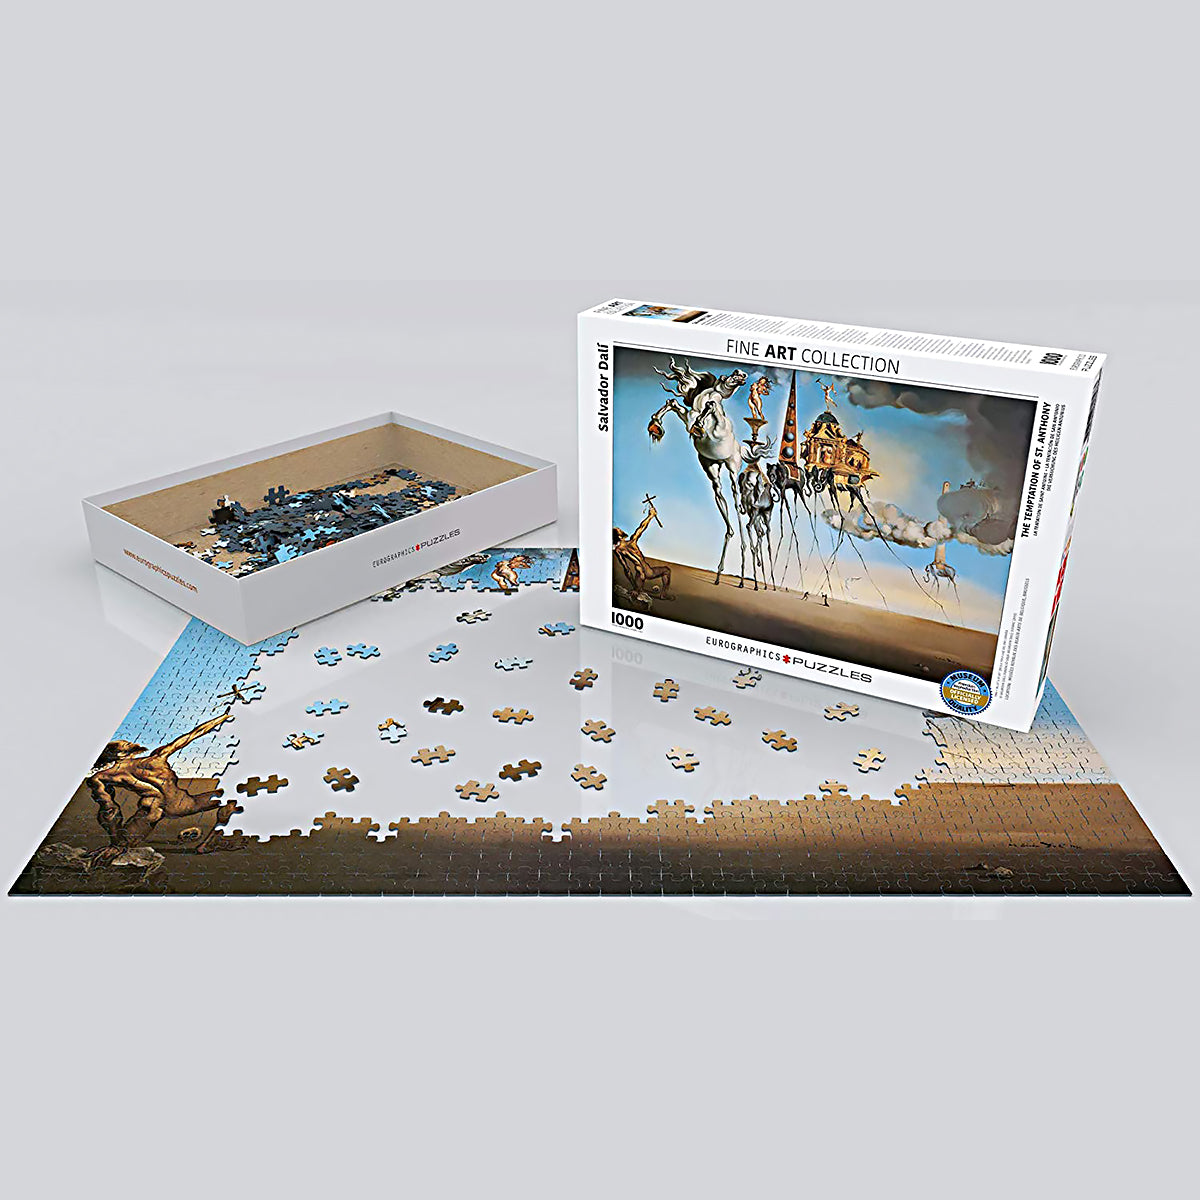 EuroGraphics Fine Art Collection's challenging and intricate jigsaw puzzle of The Temptation of St. Anthony by Salvador Dali